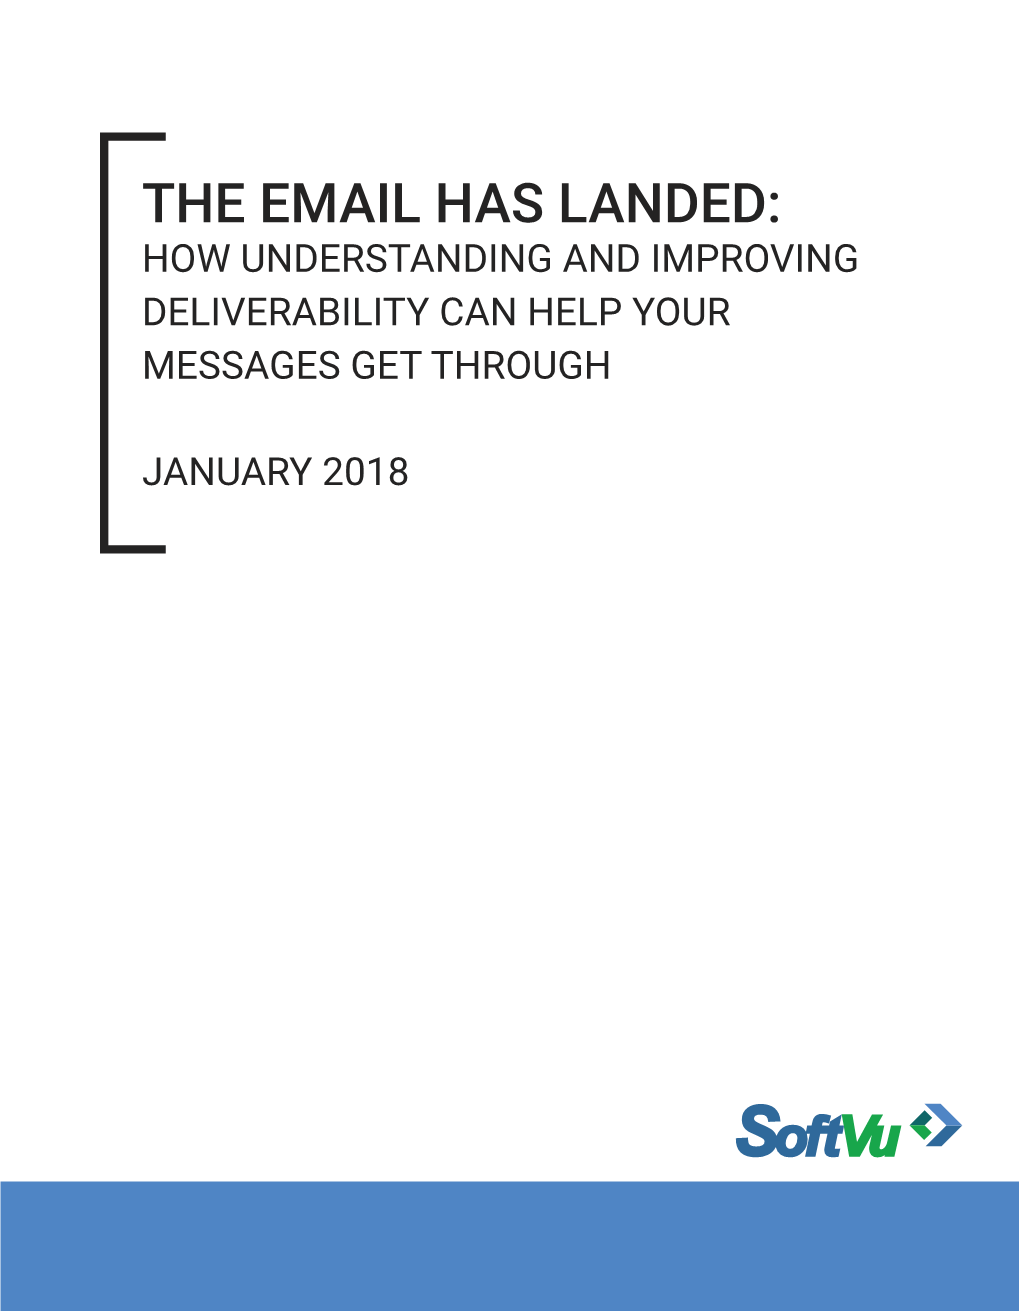 The Email Has Landed: How Understanding and Improving Deliverability Can Help Your Messages Get Through